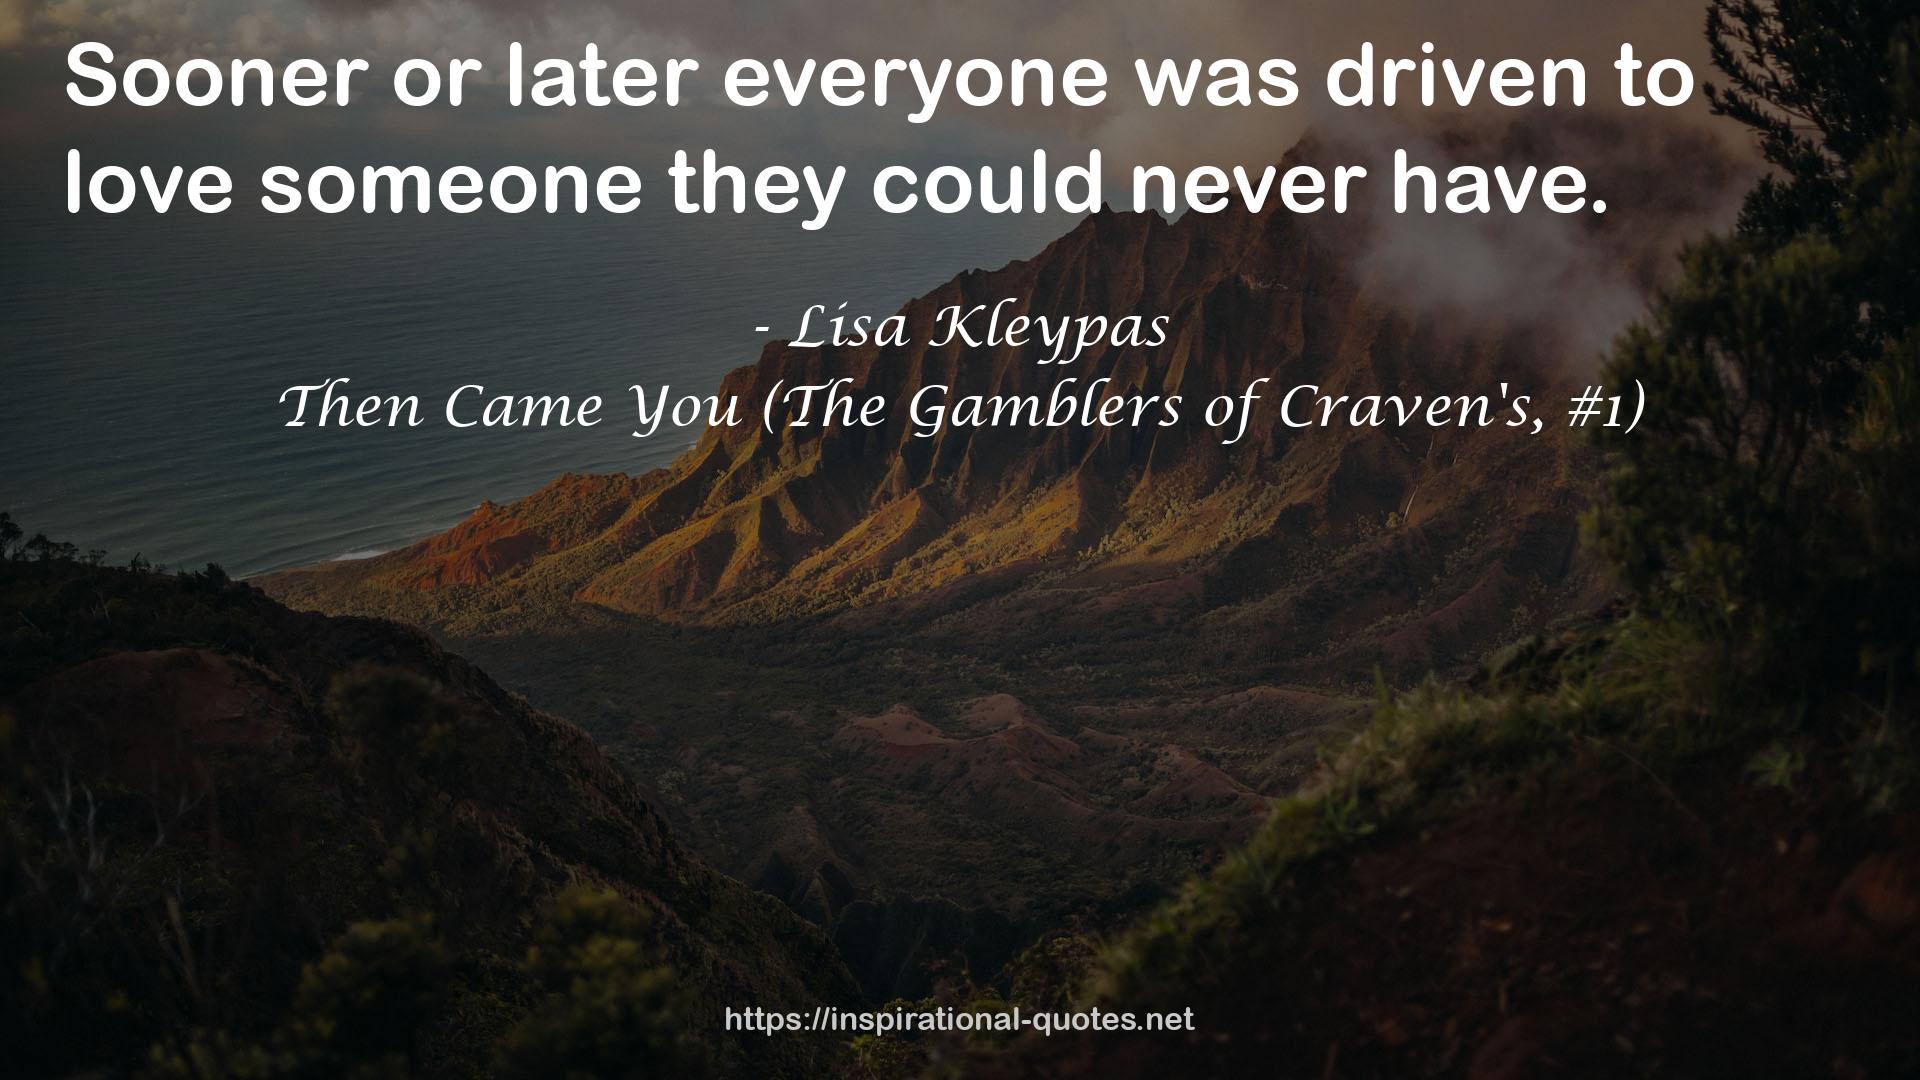 Then Came You (The Gamblers of Craven's, #1) QUOTES